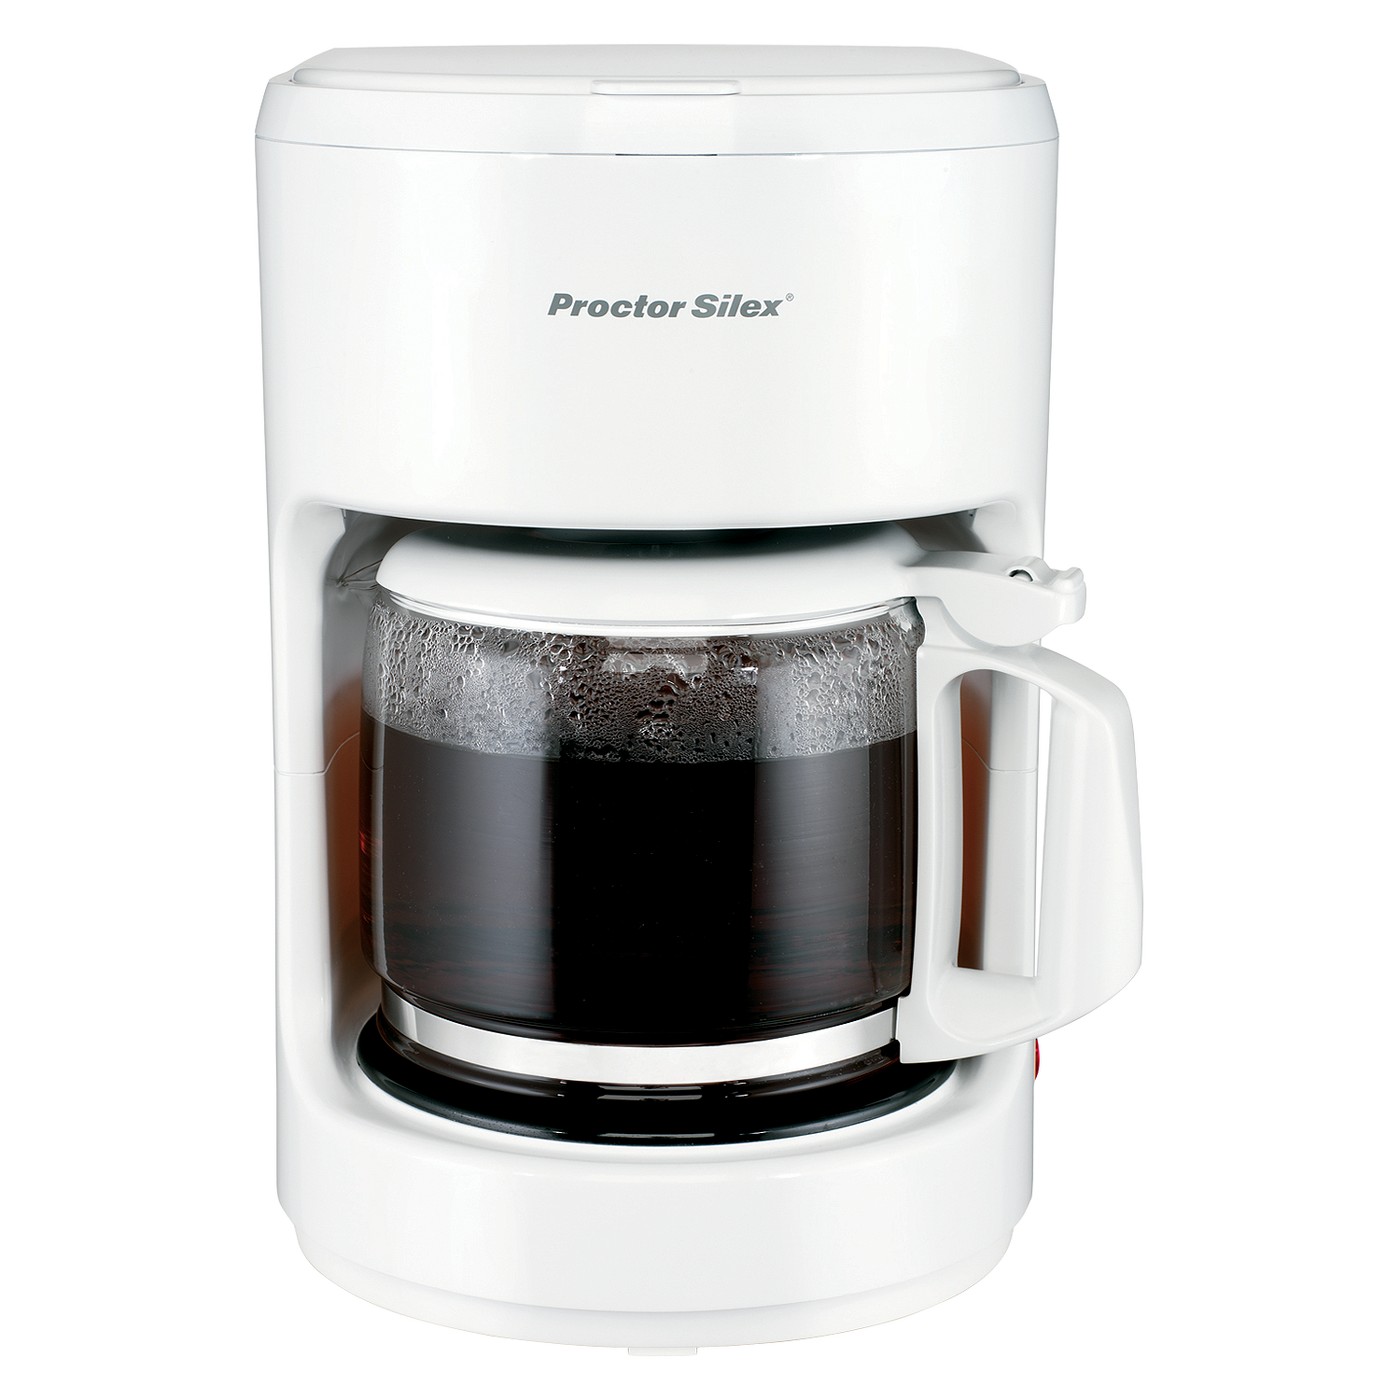 Proctor Silex 10 Cup Coffee Maker- White 48350Y - image 1 of 2